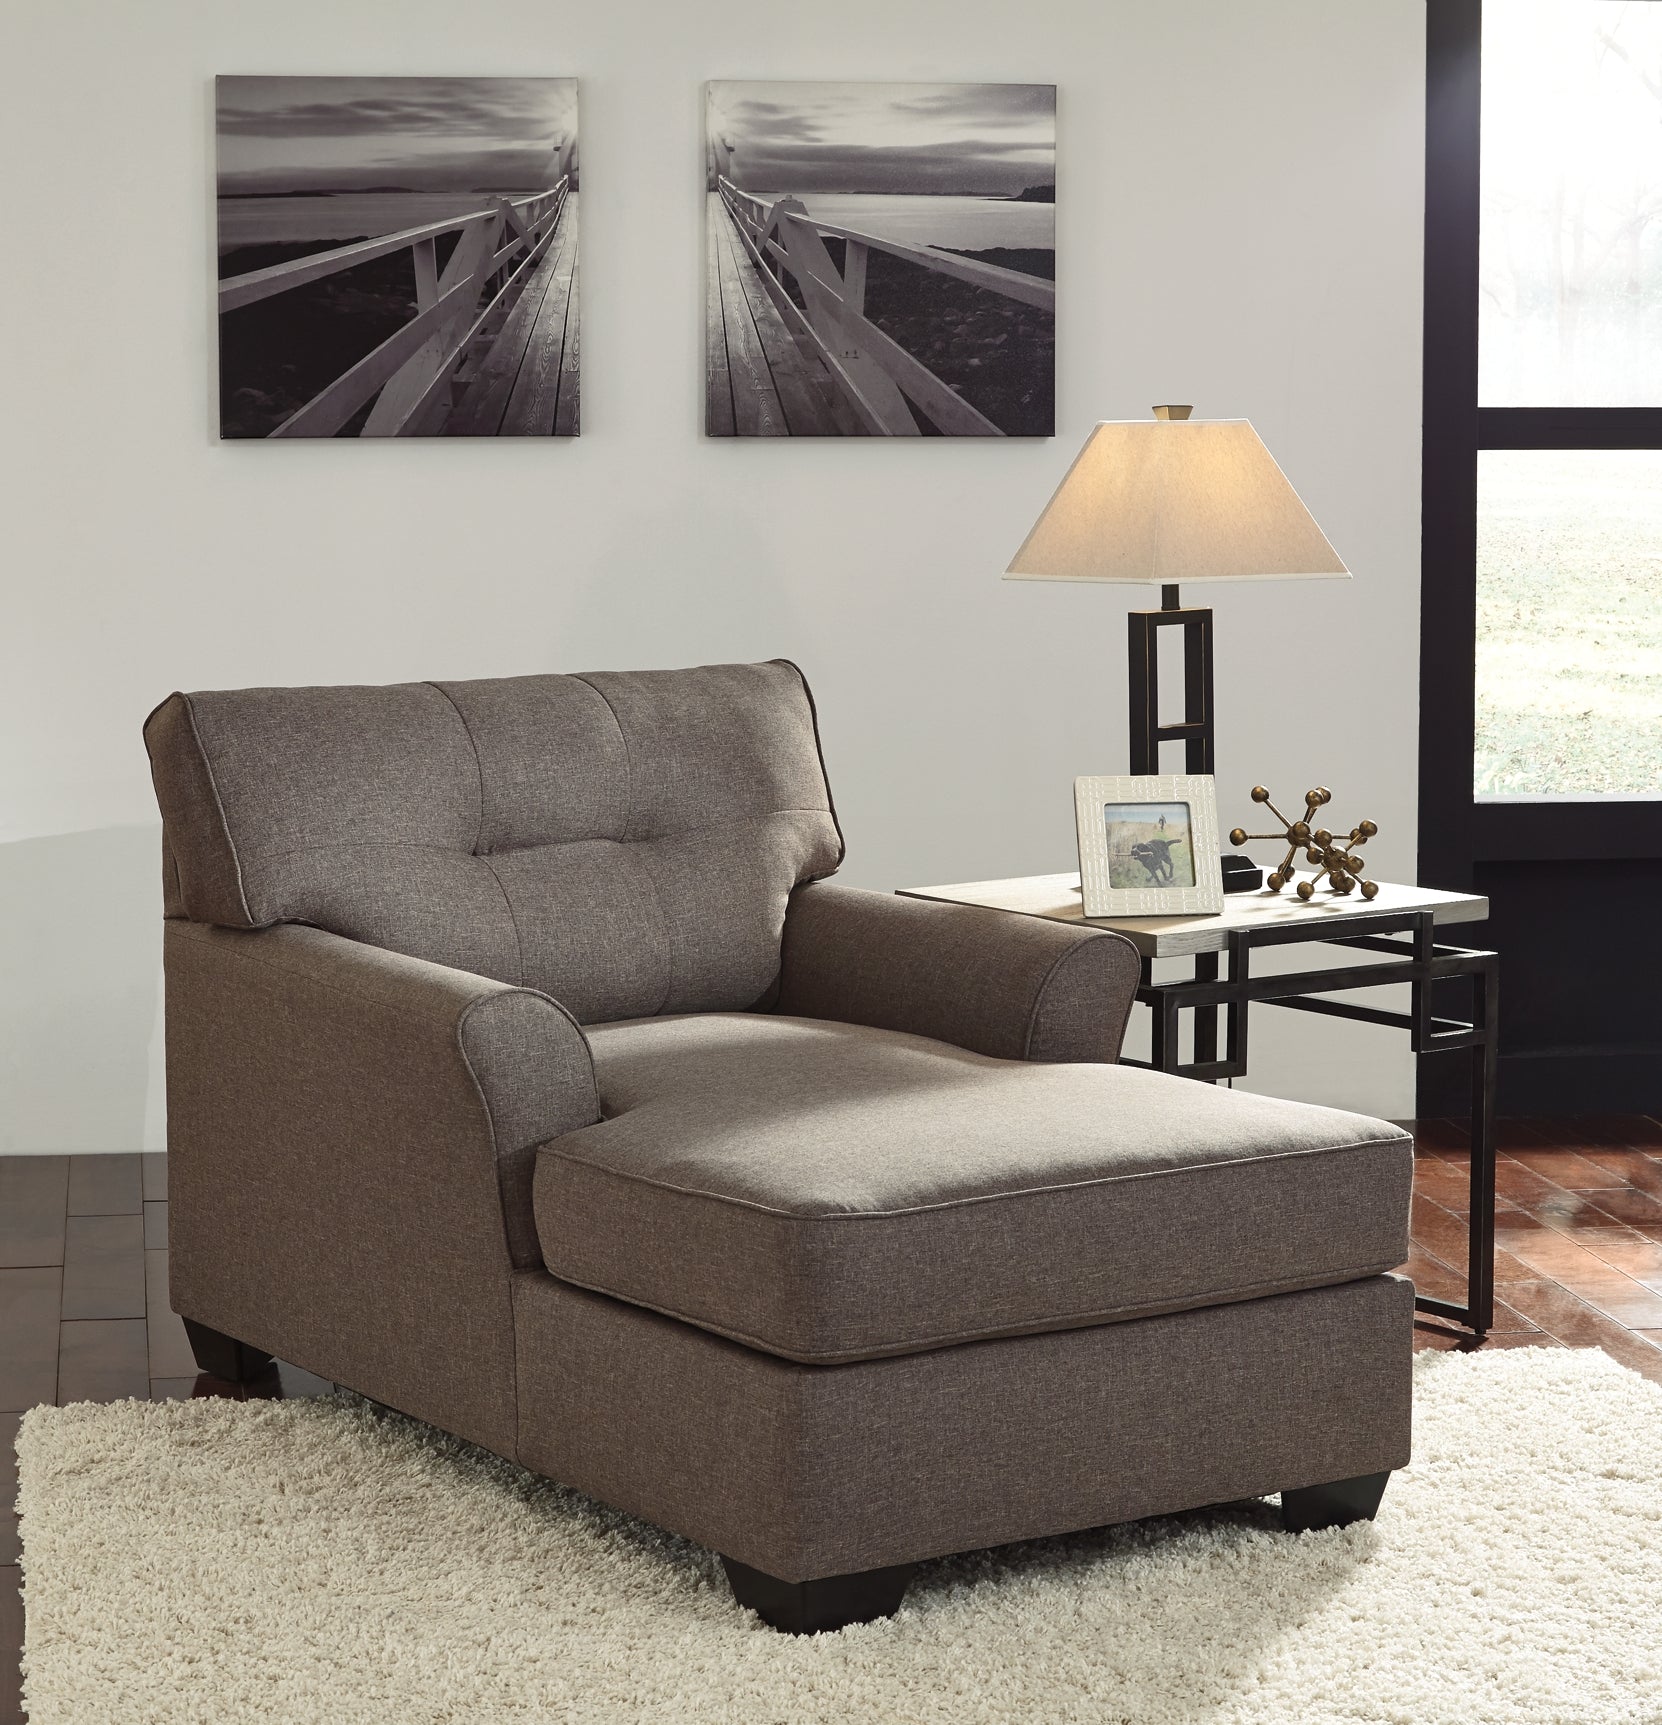 Tibbee Sofa, Loveseat and Chaise at Walker Mattress and Furniture Locations in Cedar Park and Belton TX.